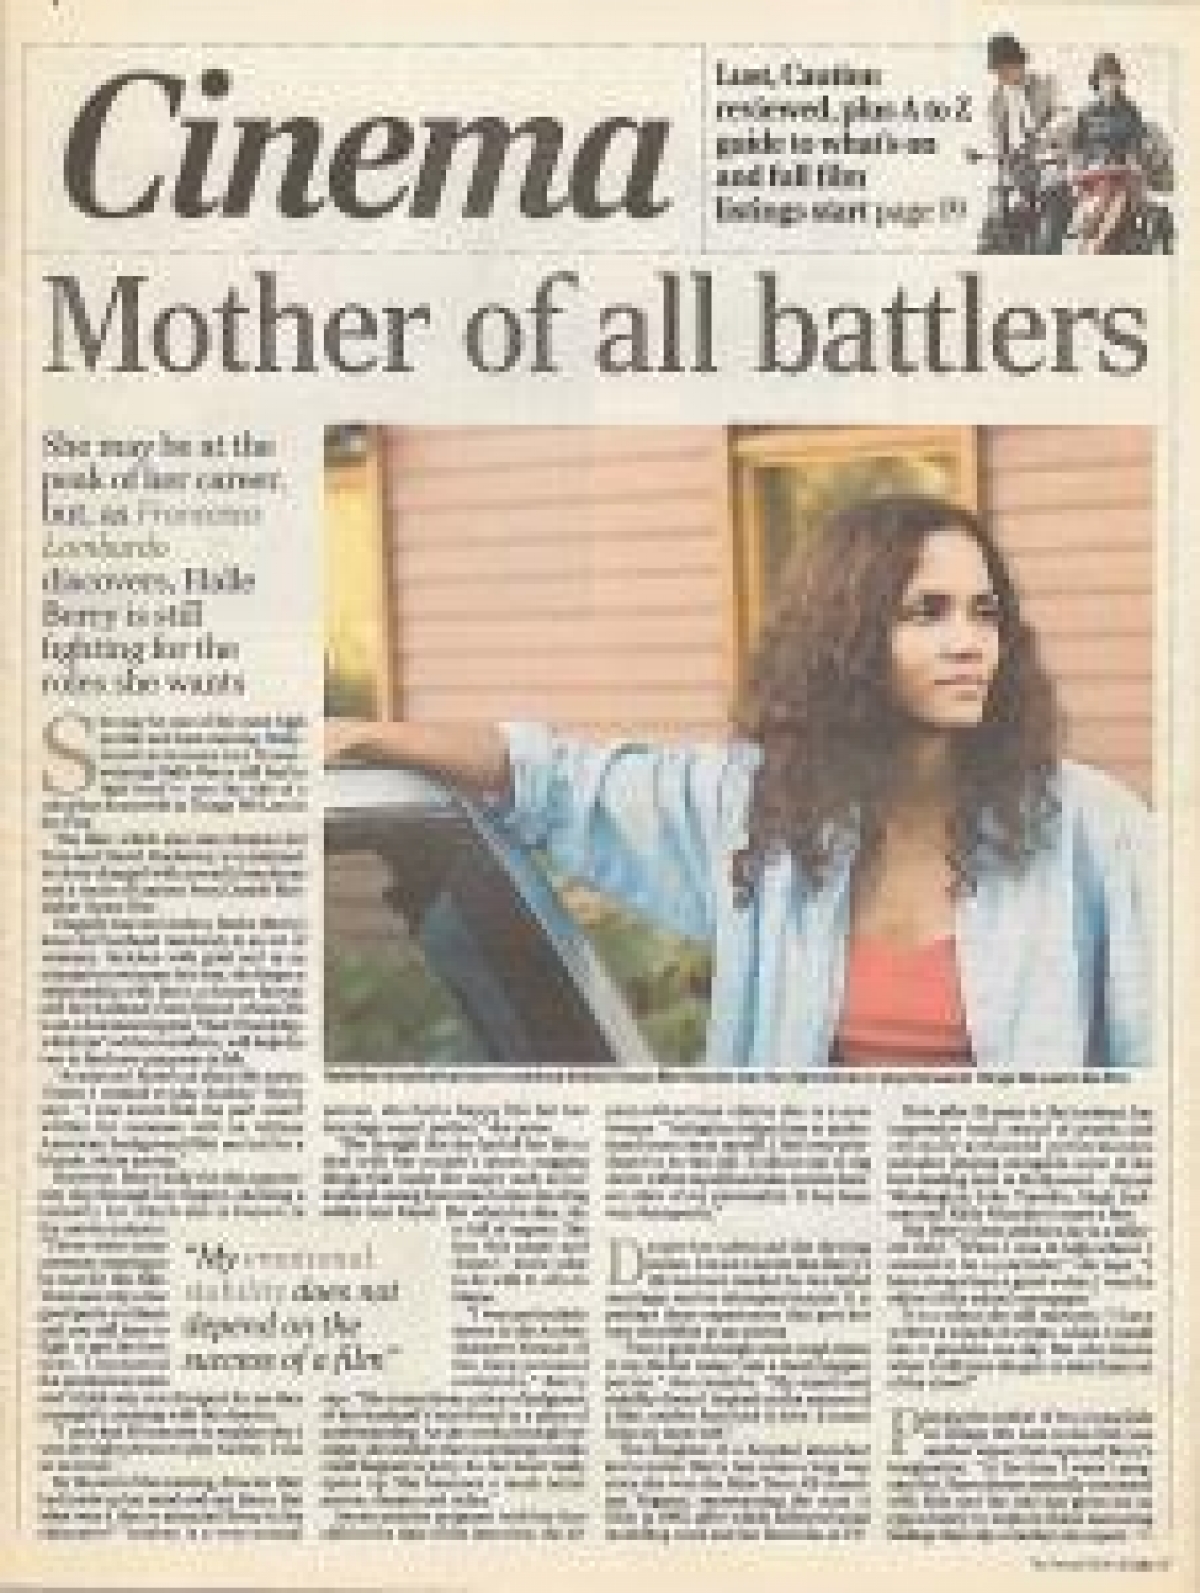 The Herald, Mother of all Battles (Halle Berry), di Francesca Lombardo